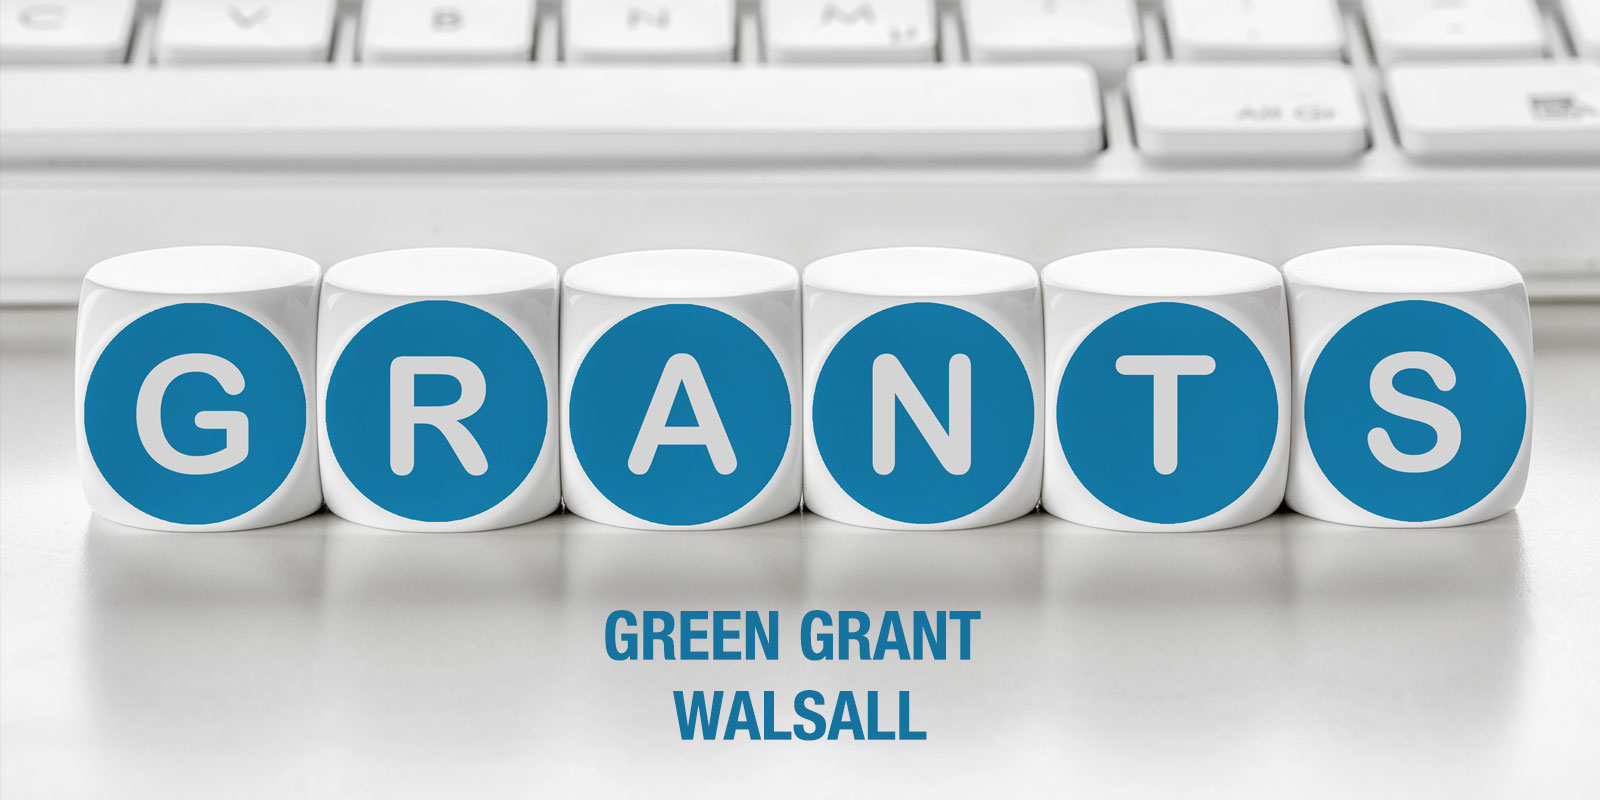 Green Grant - Walsall